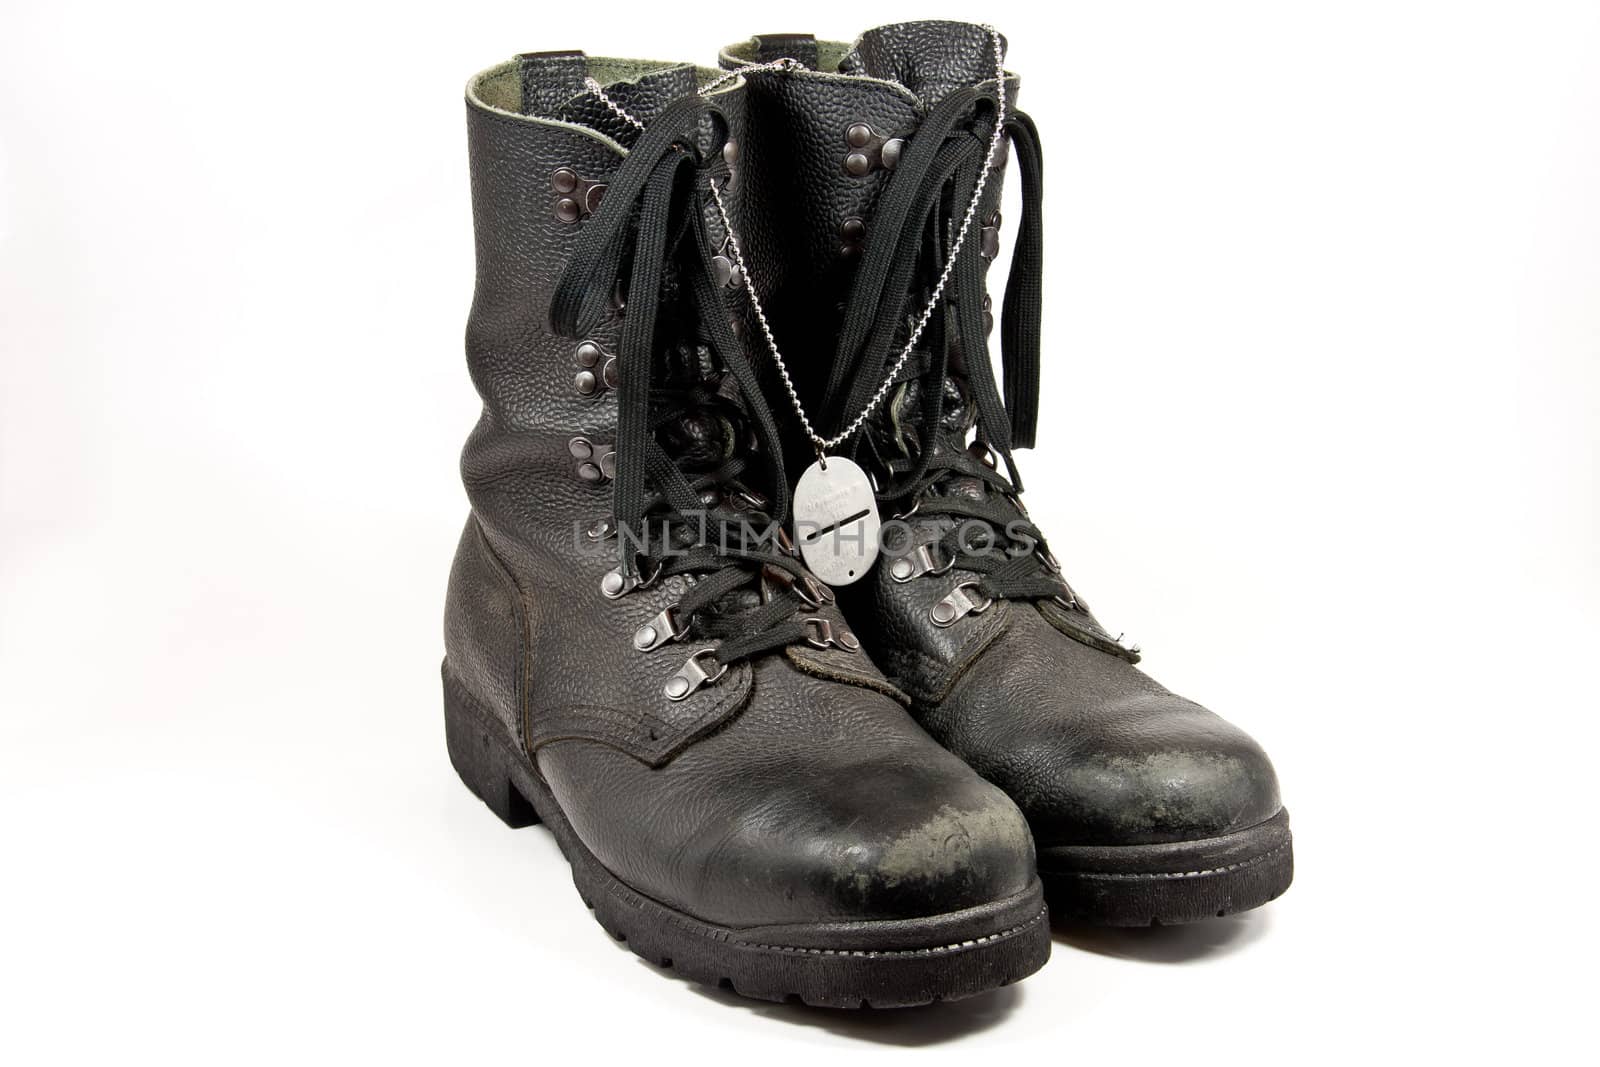 Picture of some old army boots with a dog-tag hanging